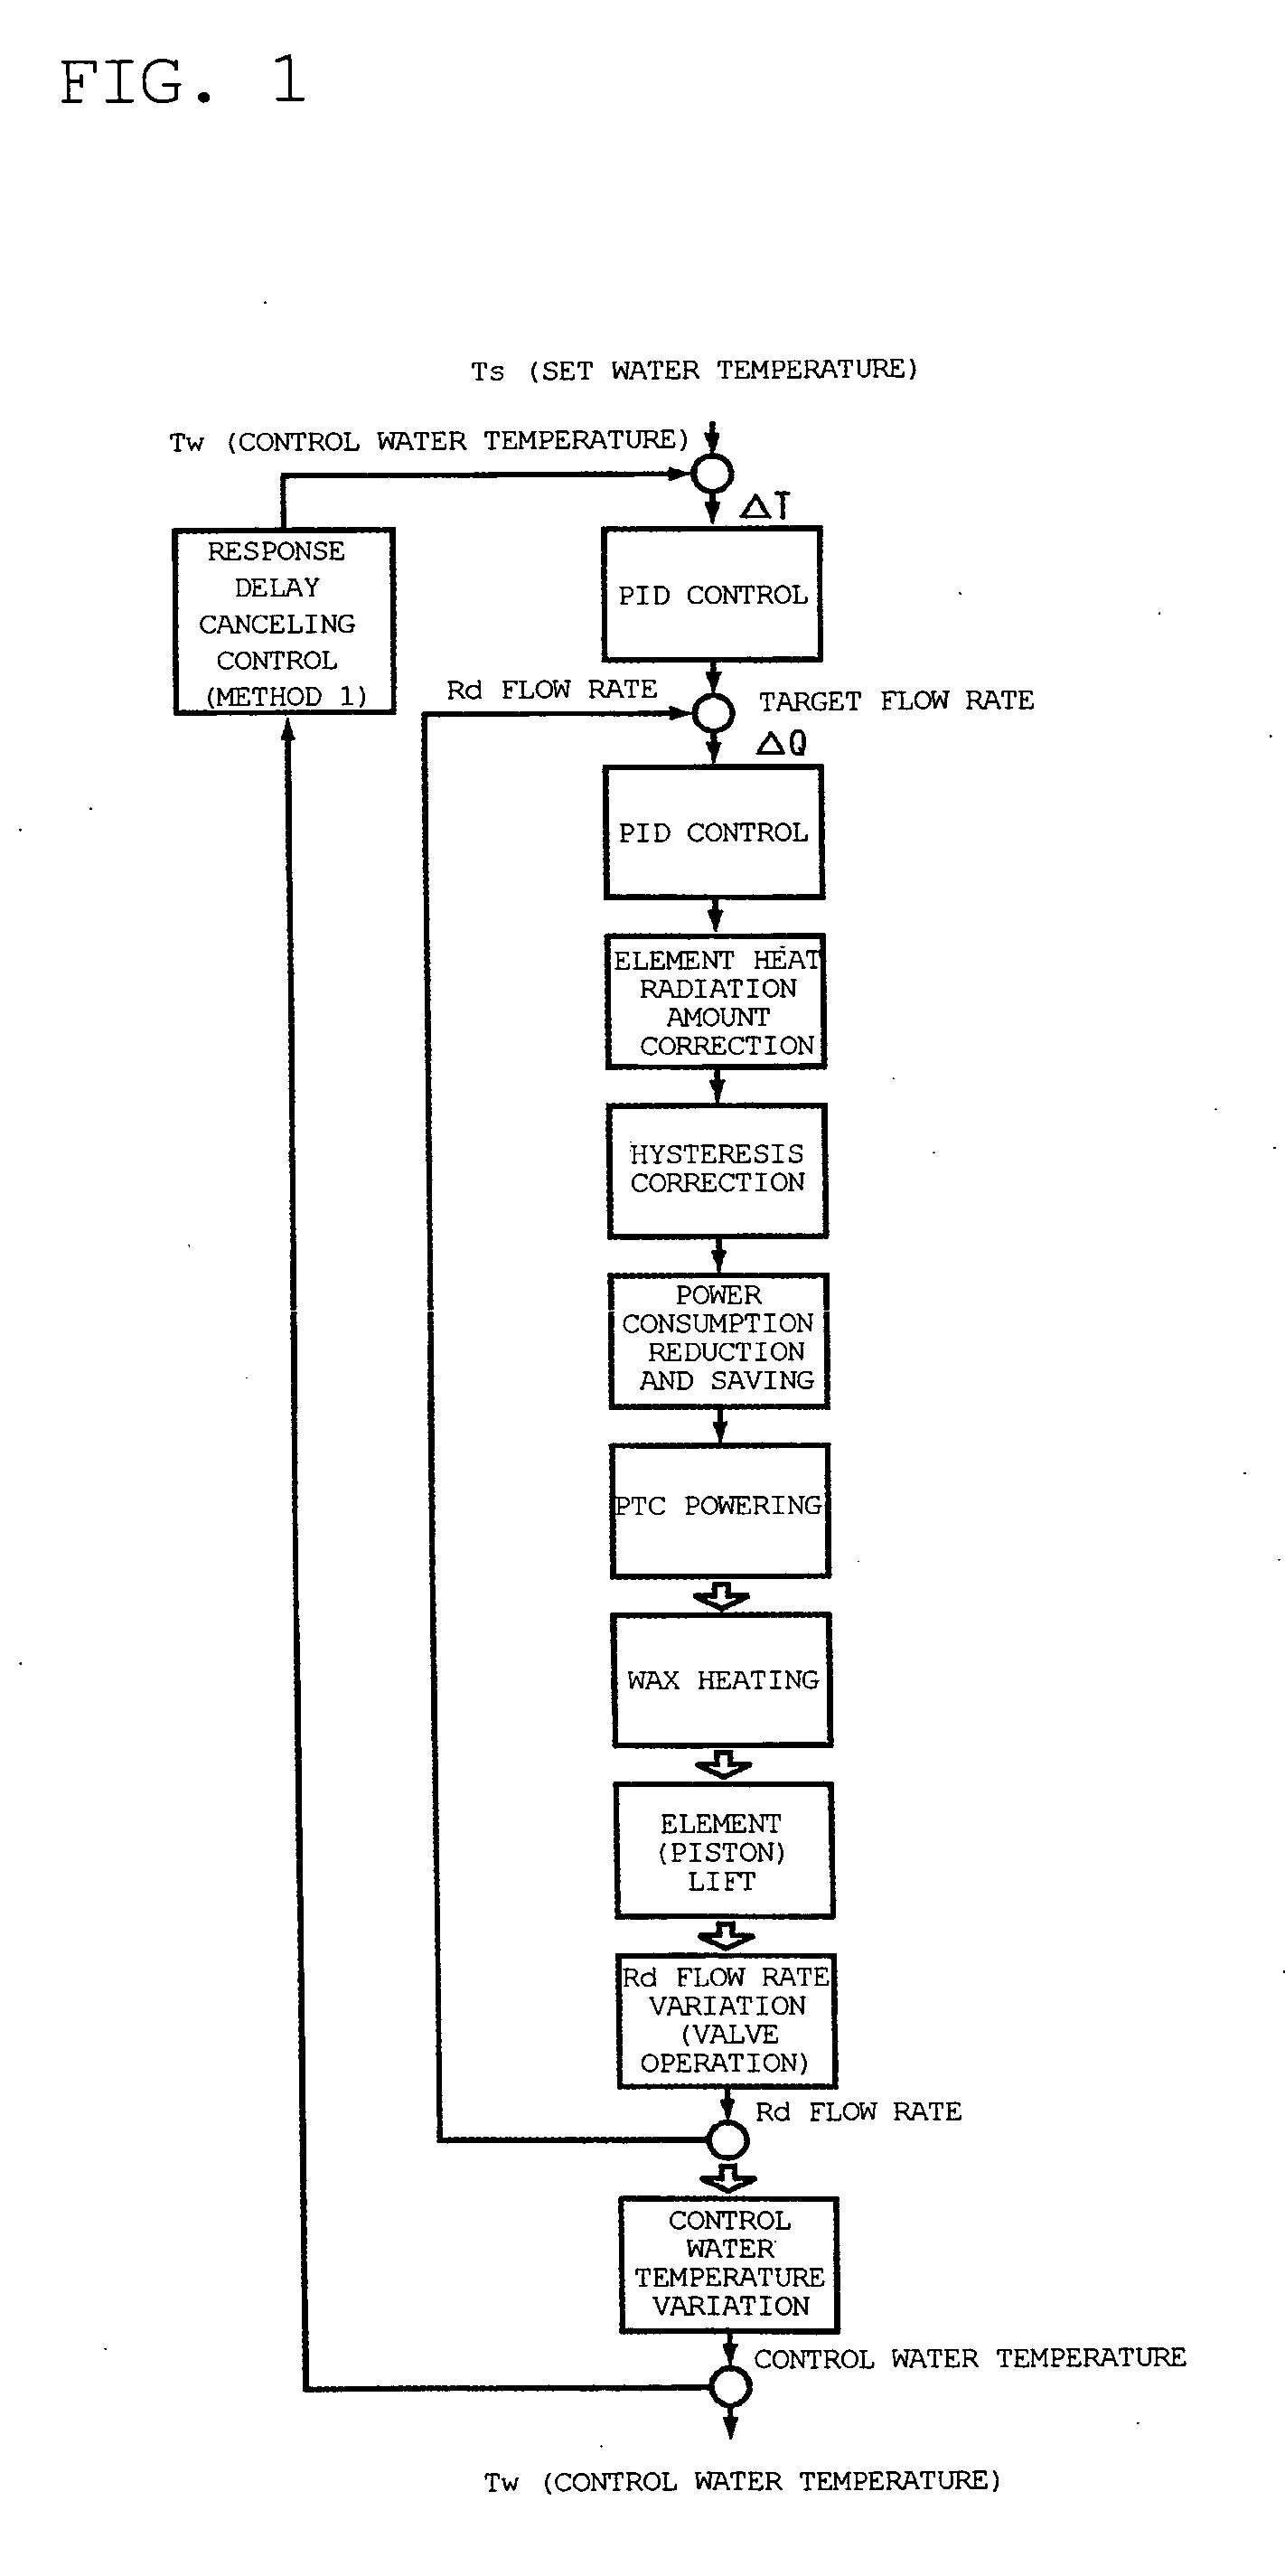 Method of controlling electronic controlled thermostat